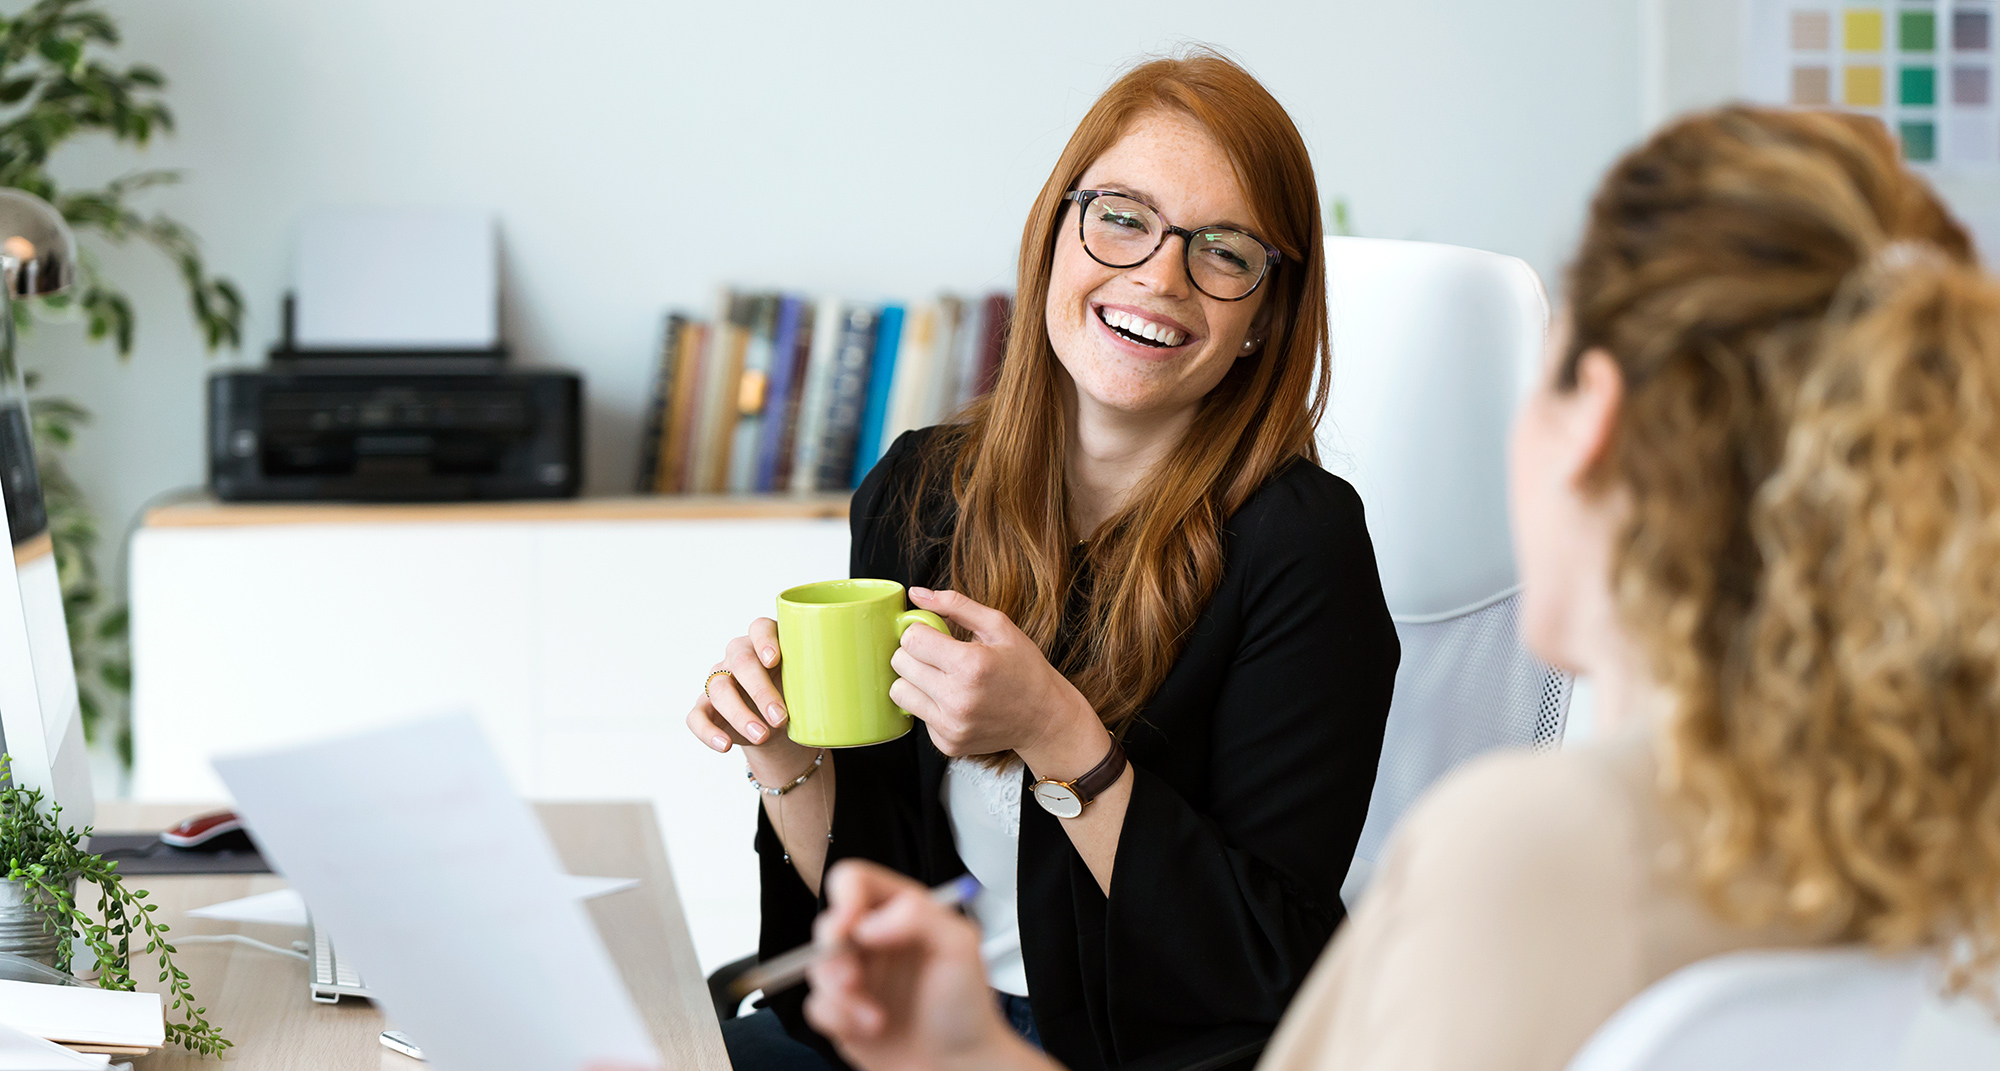 A woman with glasses holding a mug, laughing with her co-worker